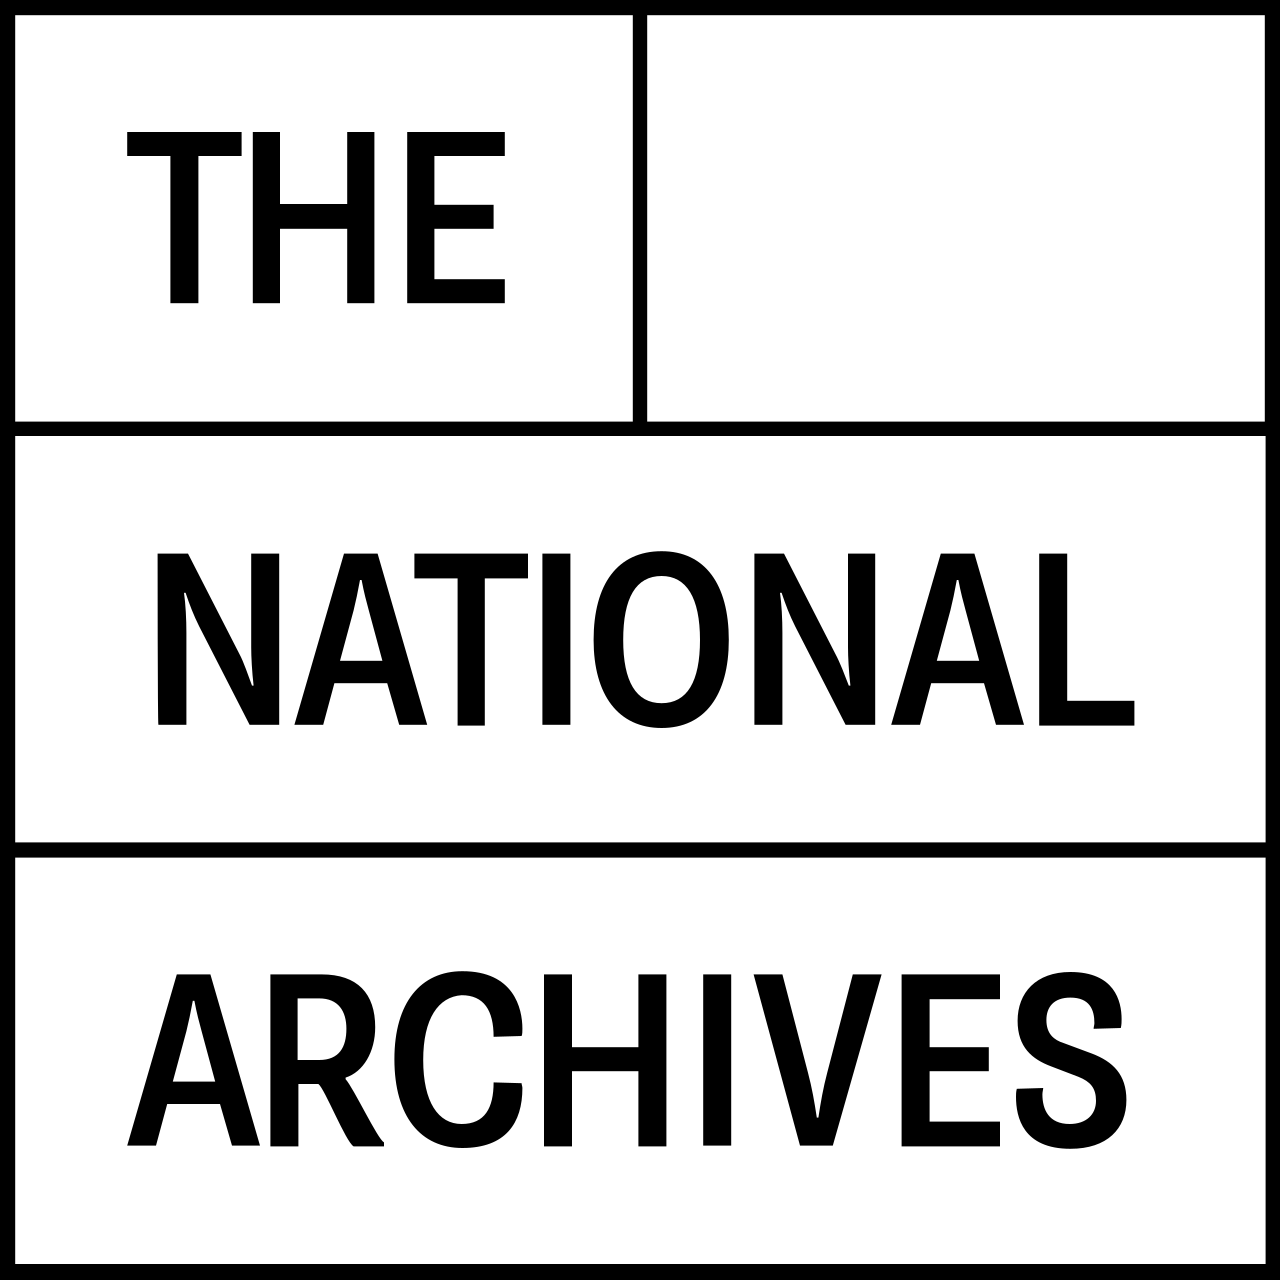 The National Archives' logo